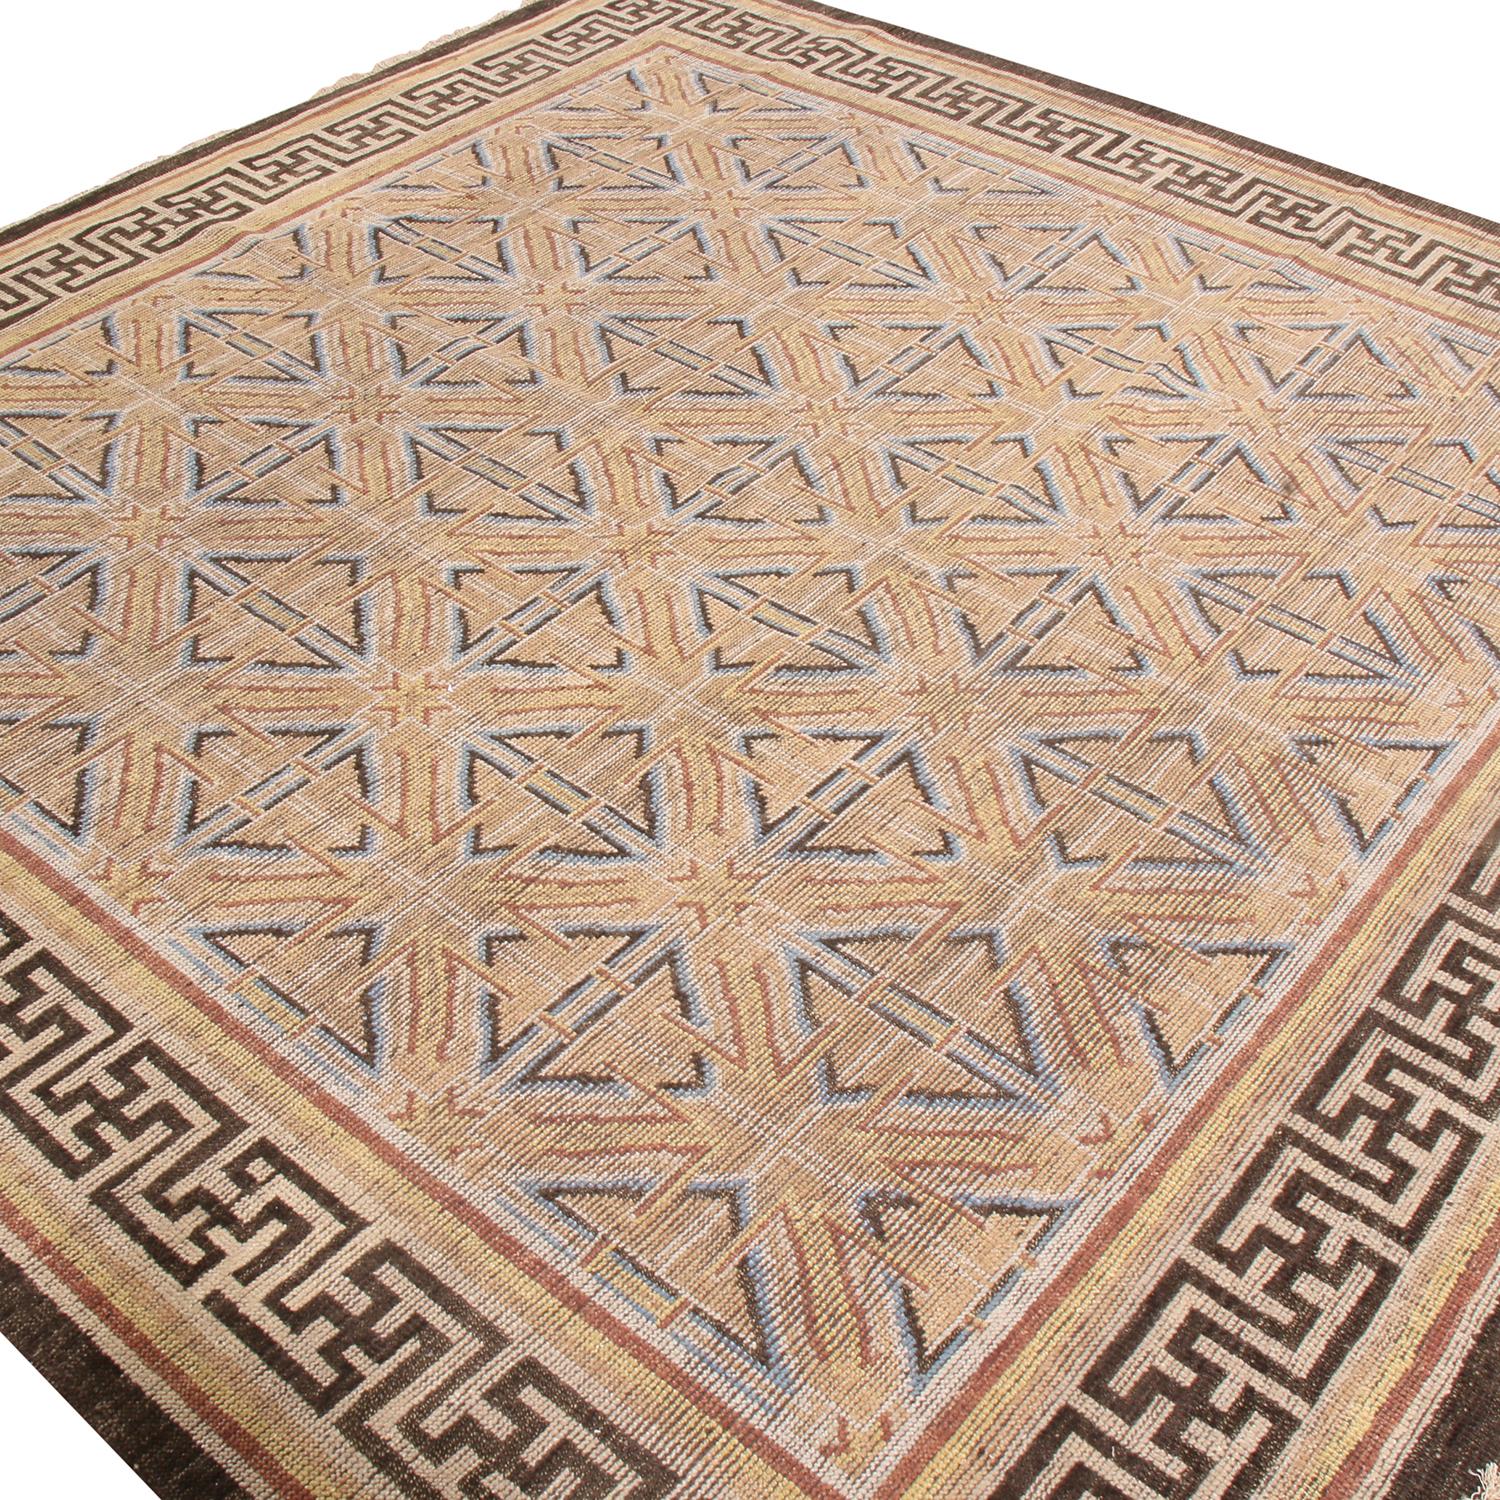 Hand knotted with high-quality wool in India, this square rug originates from Rug & Kilim’s premier Burano collection, enjoying a very European interpretation of oriental motifs including the distinguished black interlocking border, highlighting the